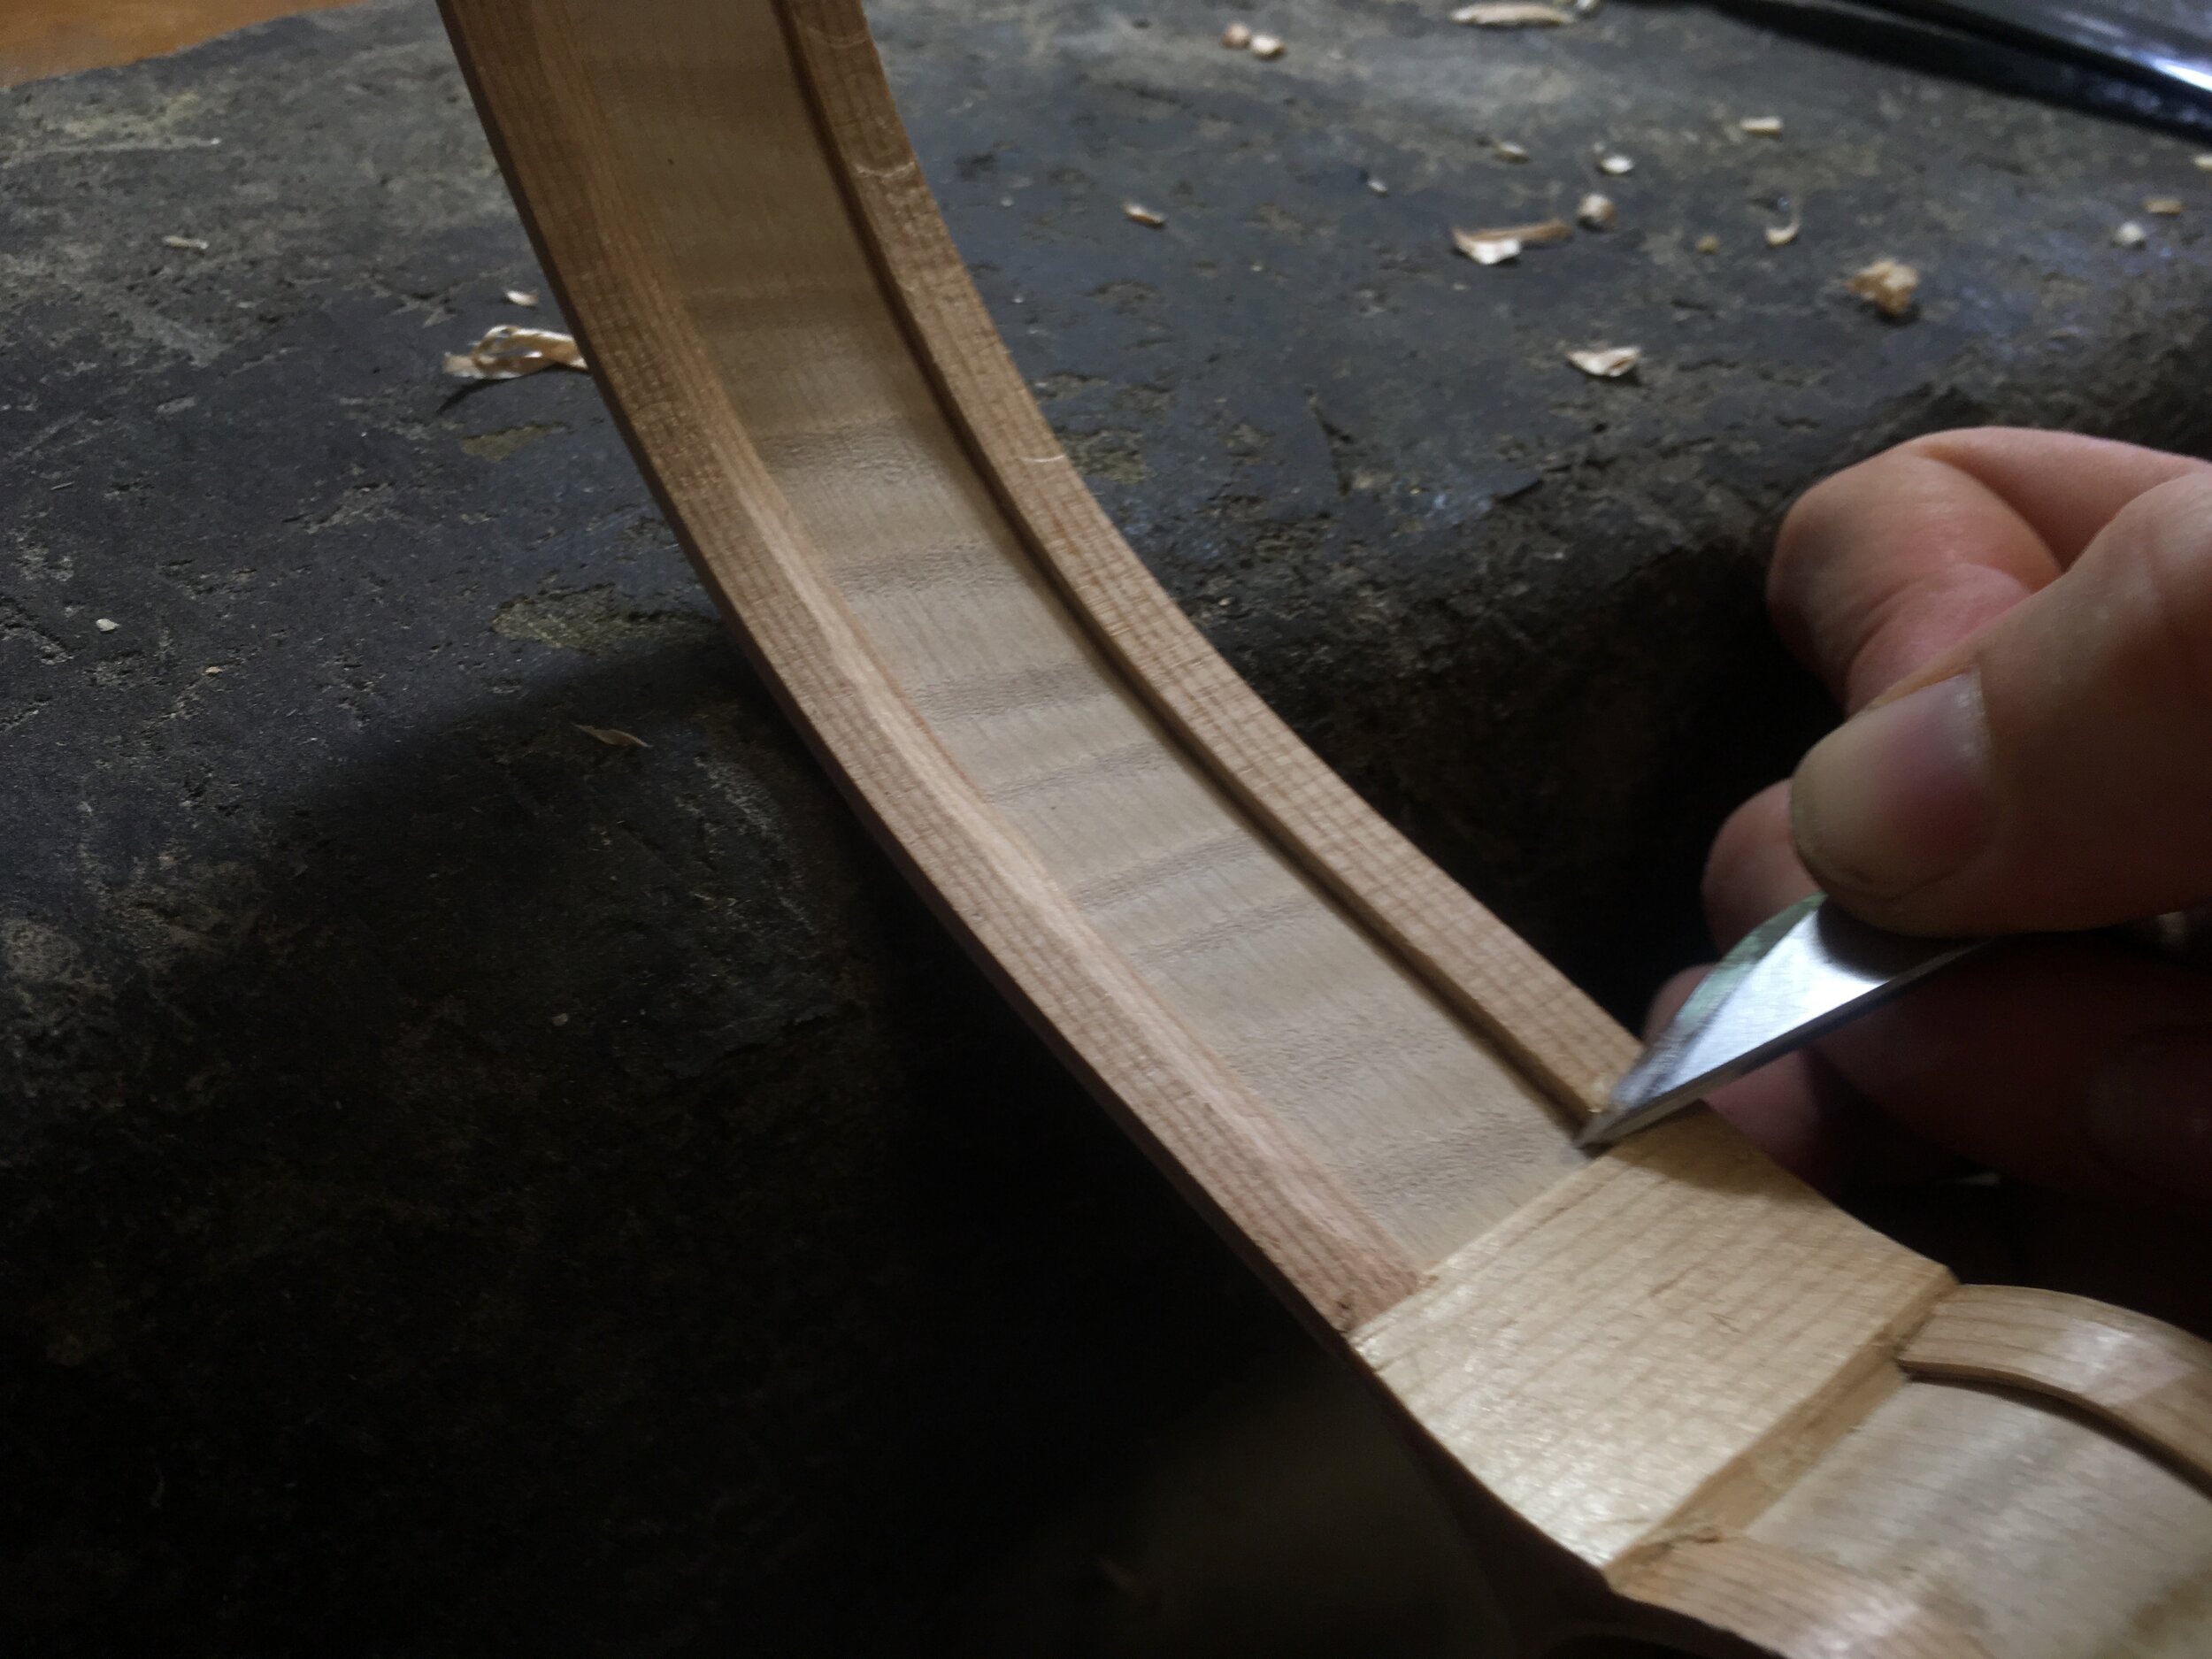  Shaping the linings with a knife 